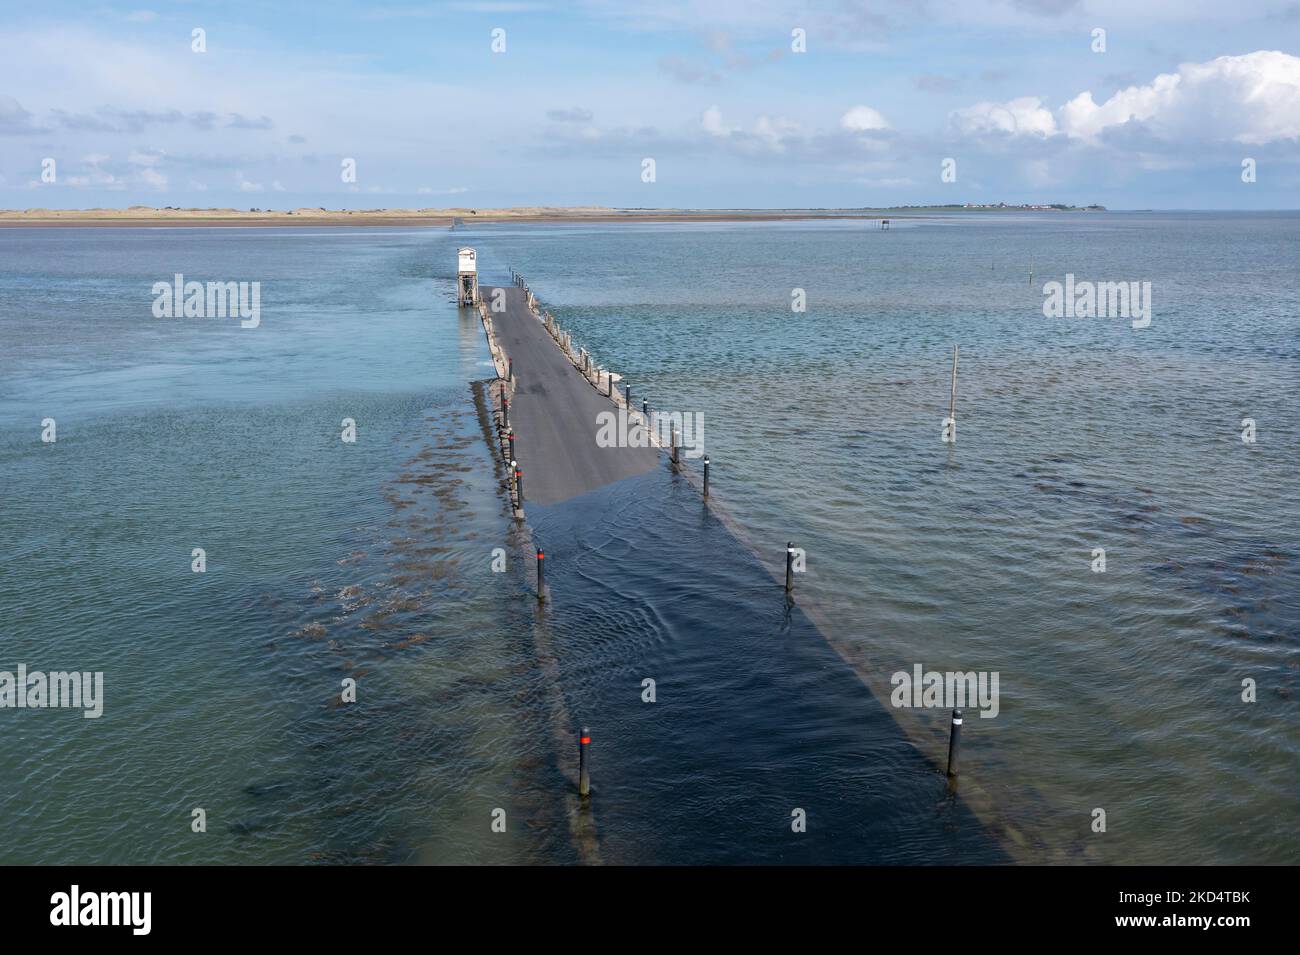 holy island causeway and refuge from above road approaching high tide daytime no people Stock Photo